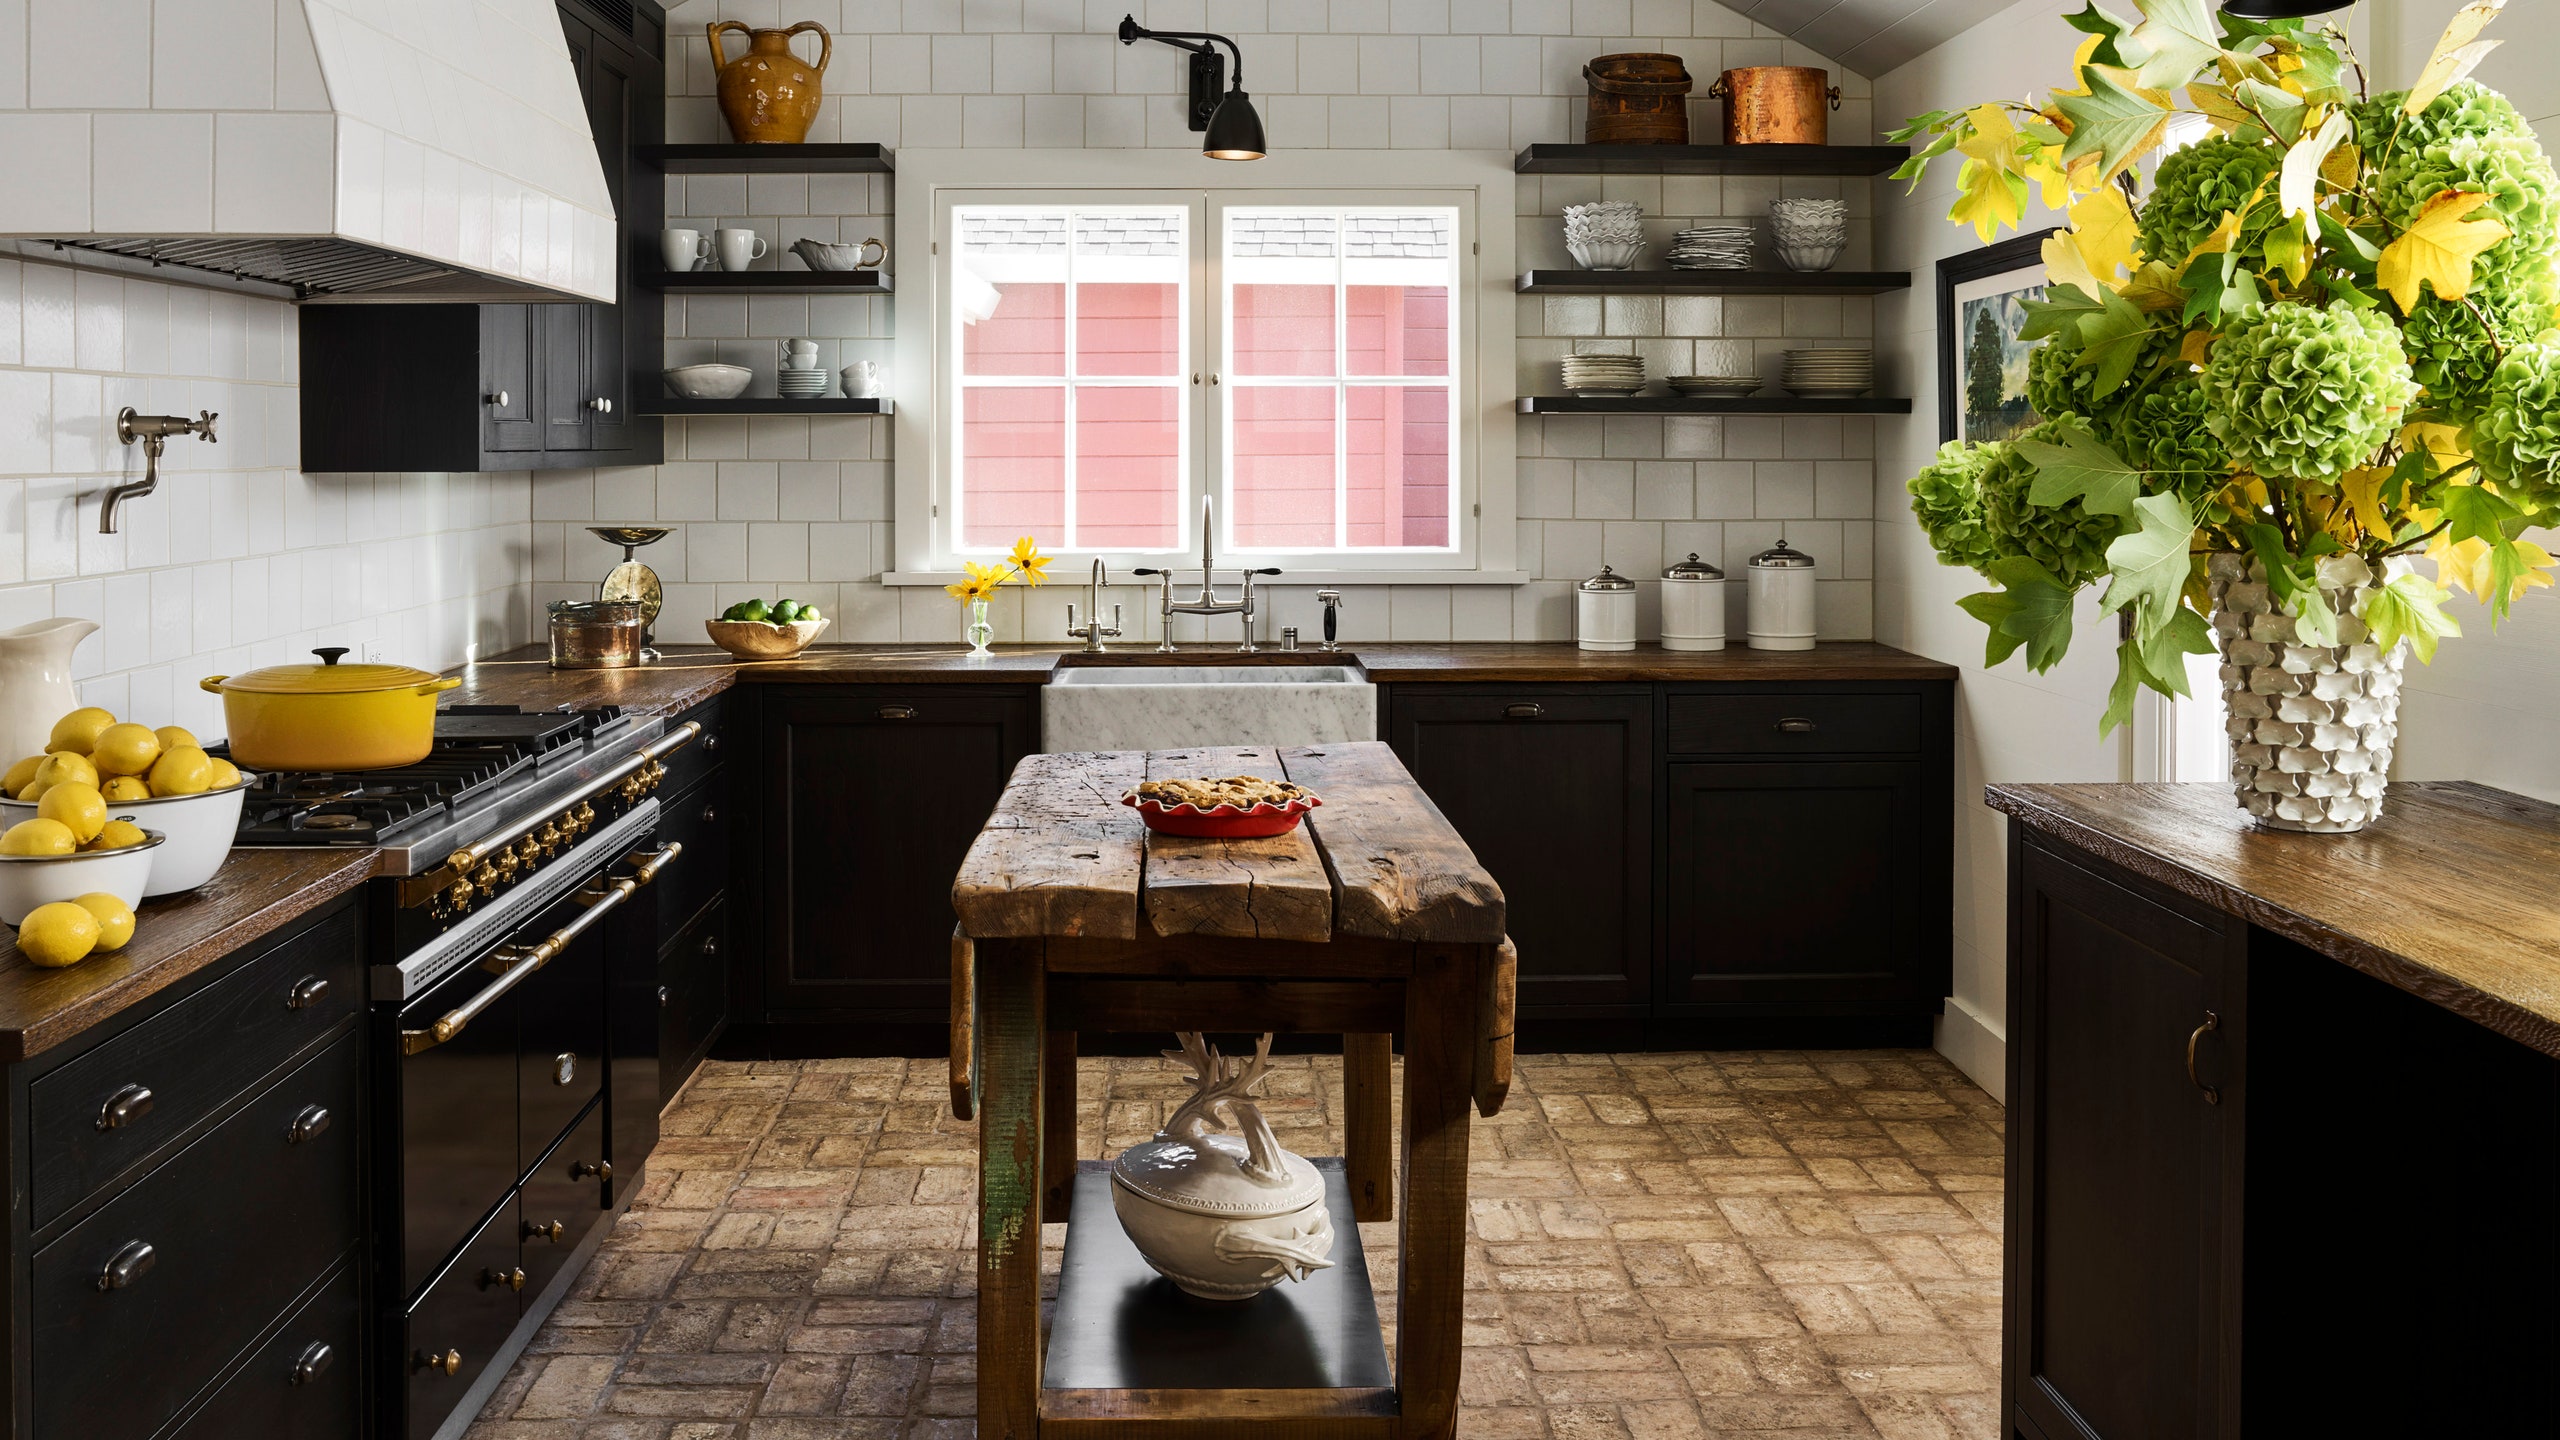 a black and white kitchen with a rustic antique central island made of wood